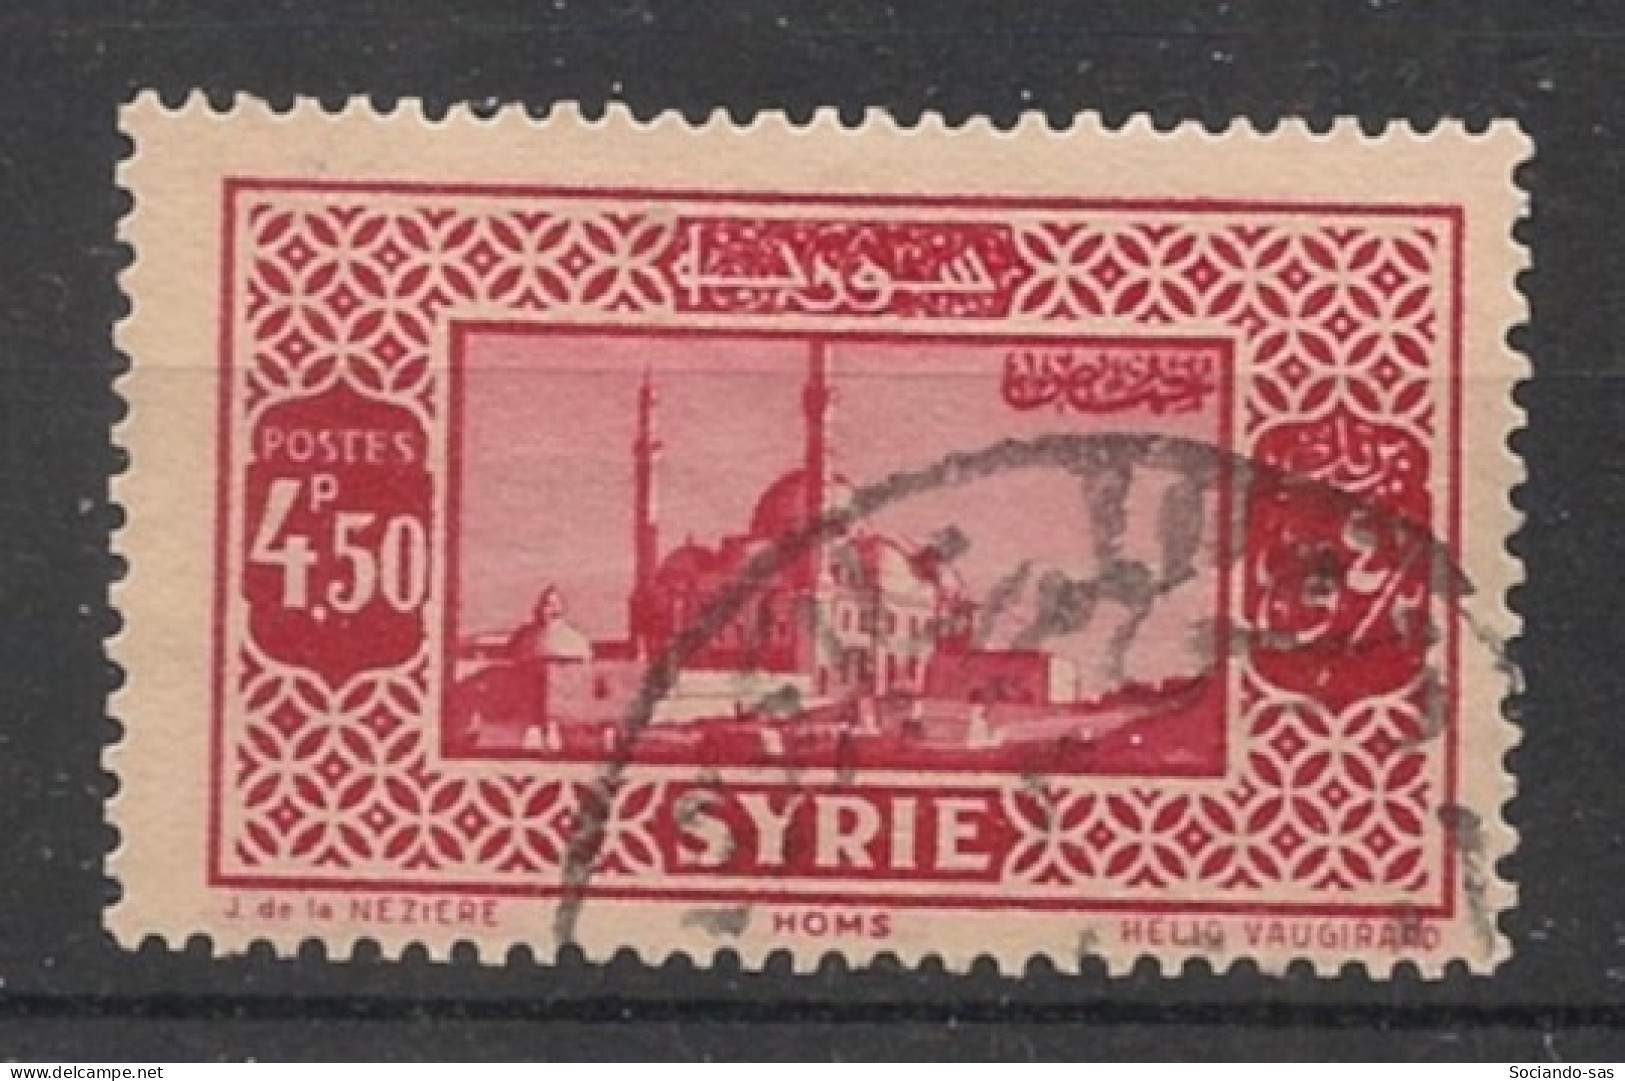 SYRIE - 1930-36 - N°YT. 209 - Homs 4pi50 - Oblitéré / Used - Used Stamps